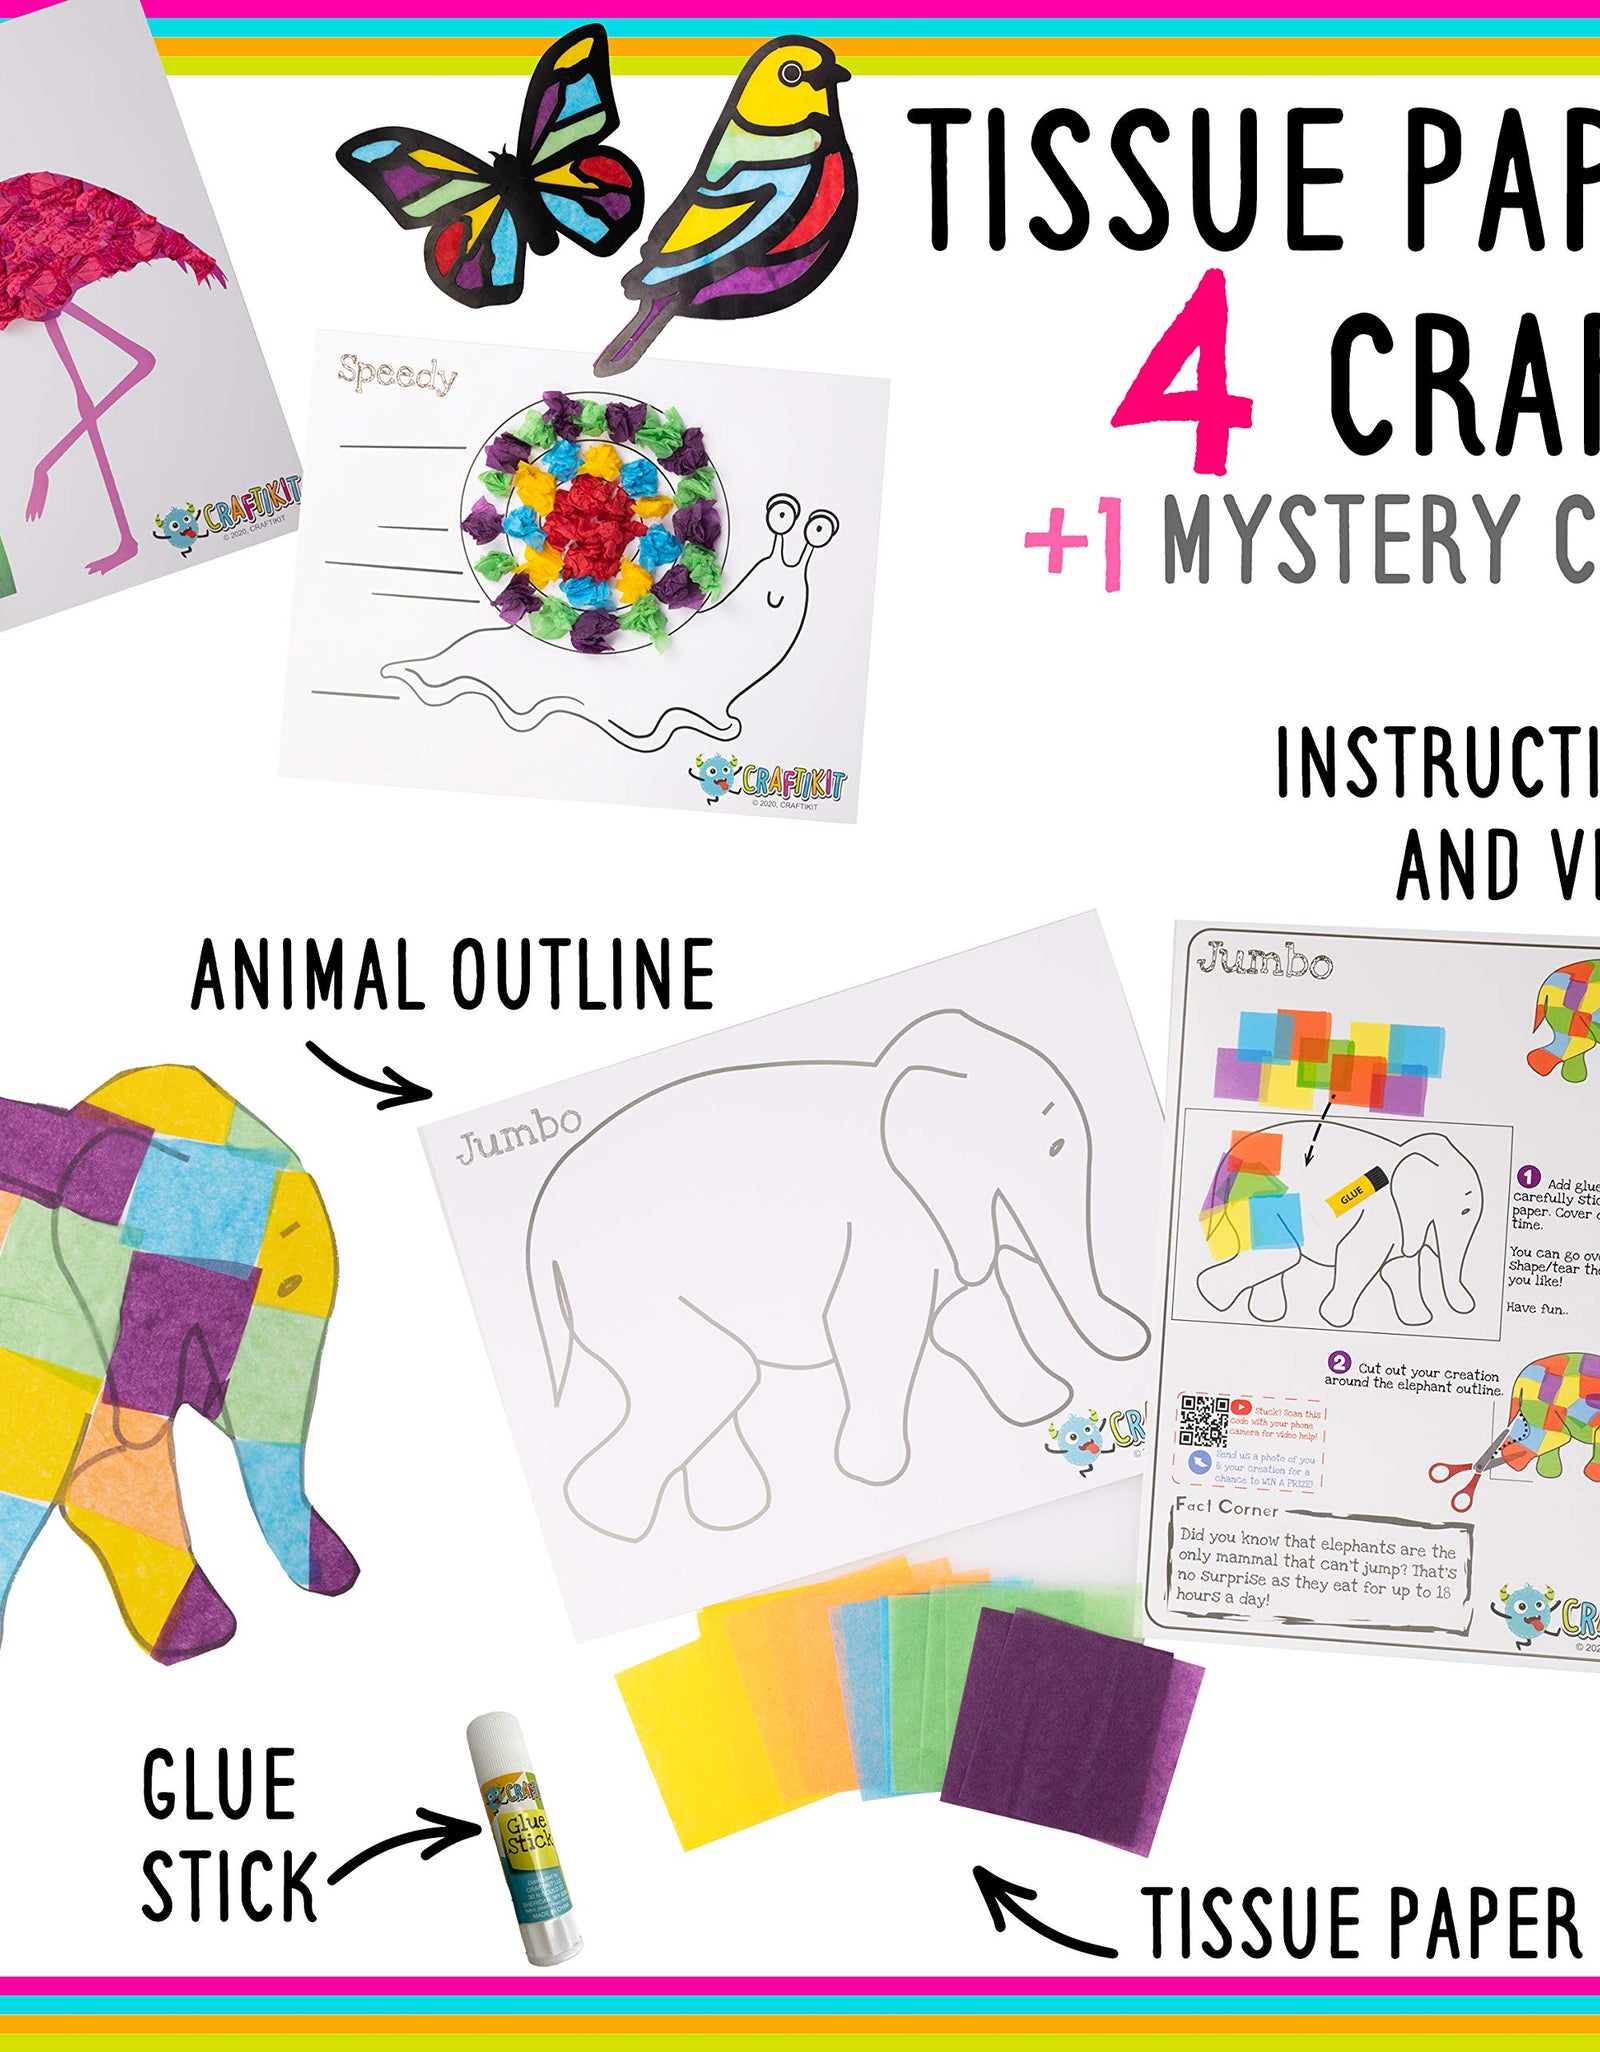 Craftikit Arts and Crafts for Kids - 20 All-Inclusive Fun Toddler Craft Box for Kids - Organized Art Supplies for Kids Ages 3-8 - Animal-Themed Kids Craft Kits